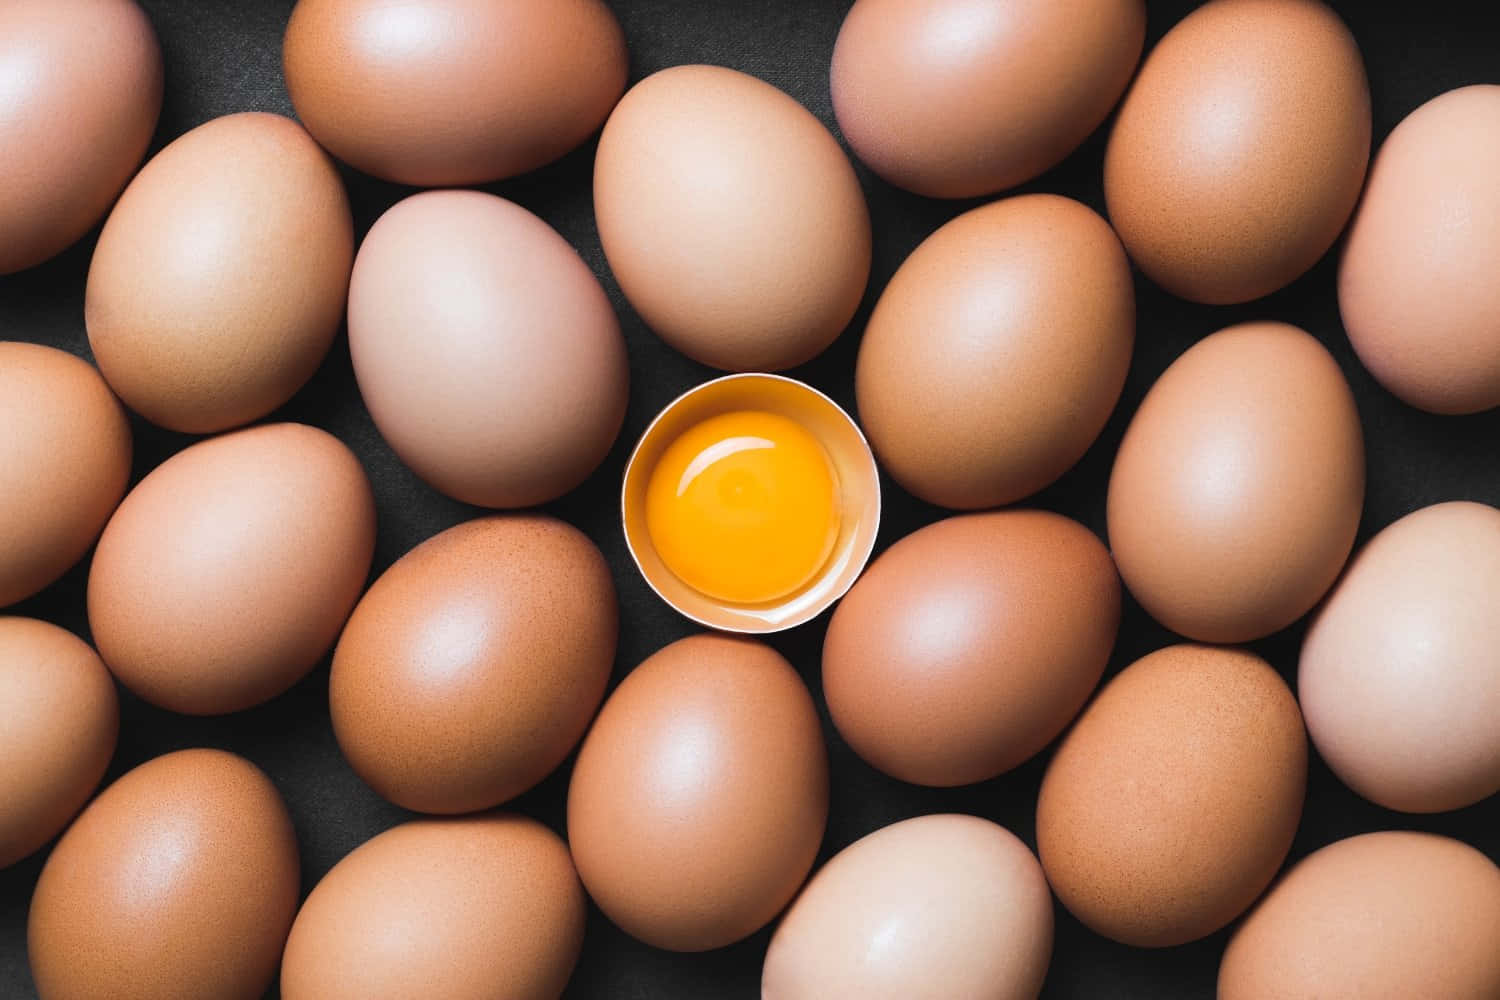 The Shocking Cost Of Buying 100 Eggs Revealed!